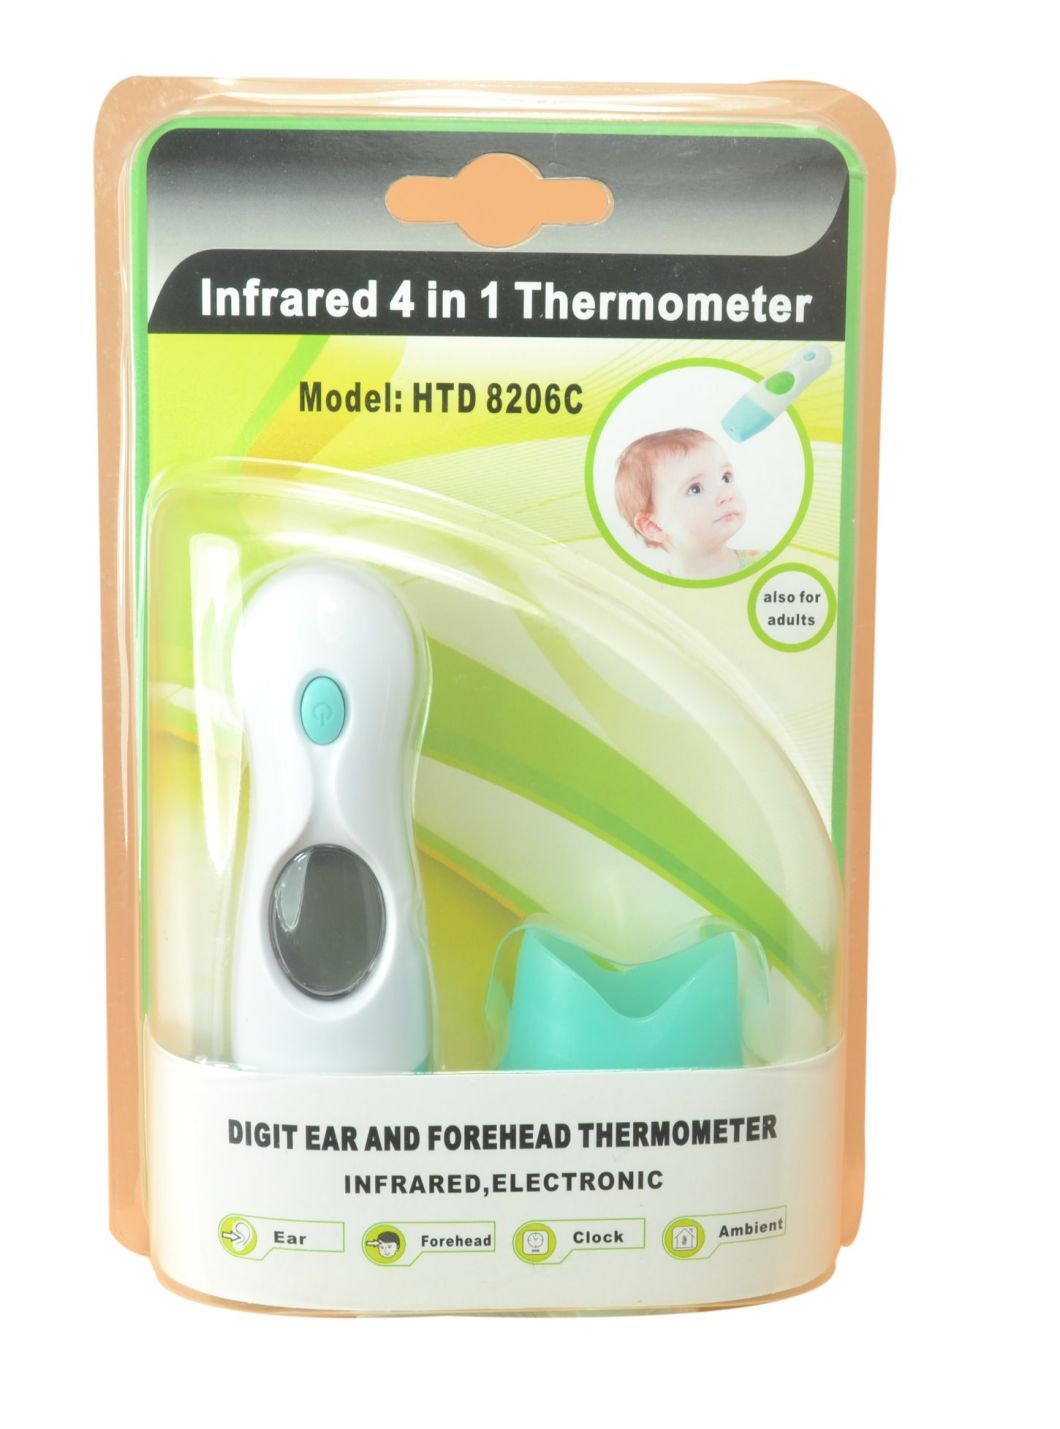 Infrared Digital Ear and Forehead Thermometer